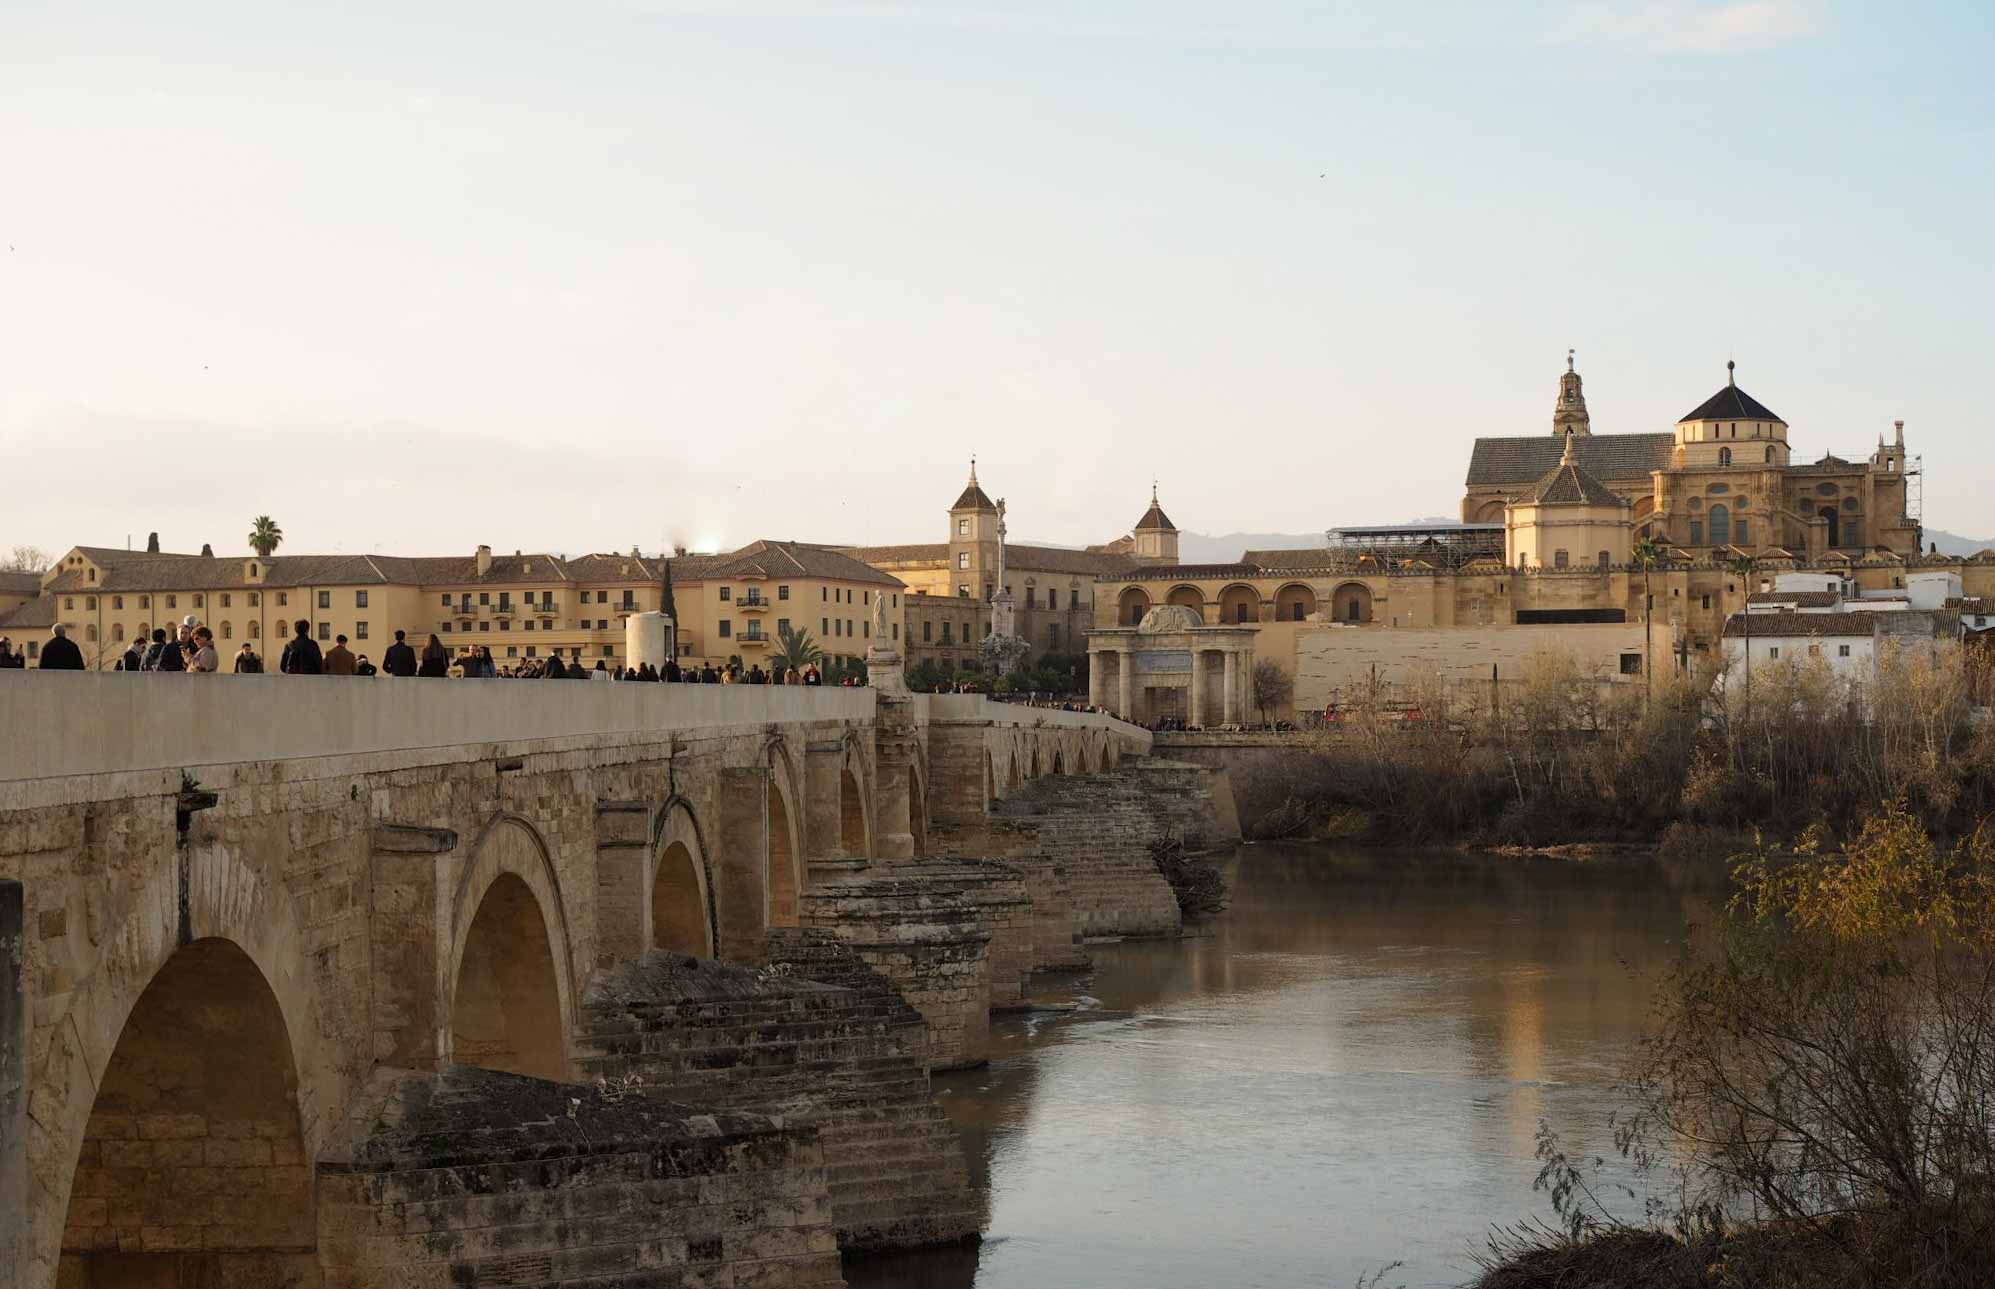 Old stone bridge across a river, with cathedral behind